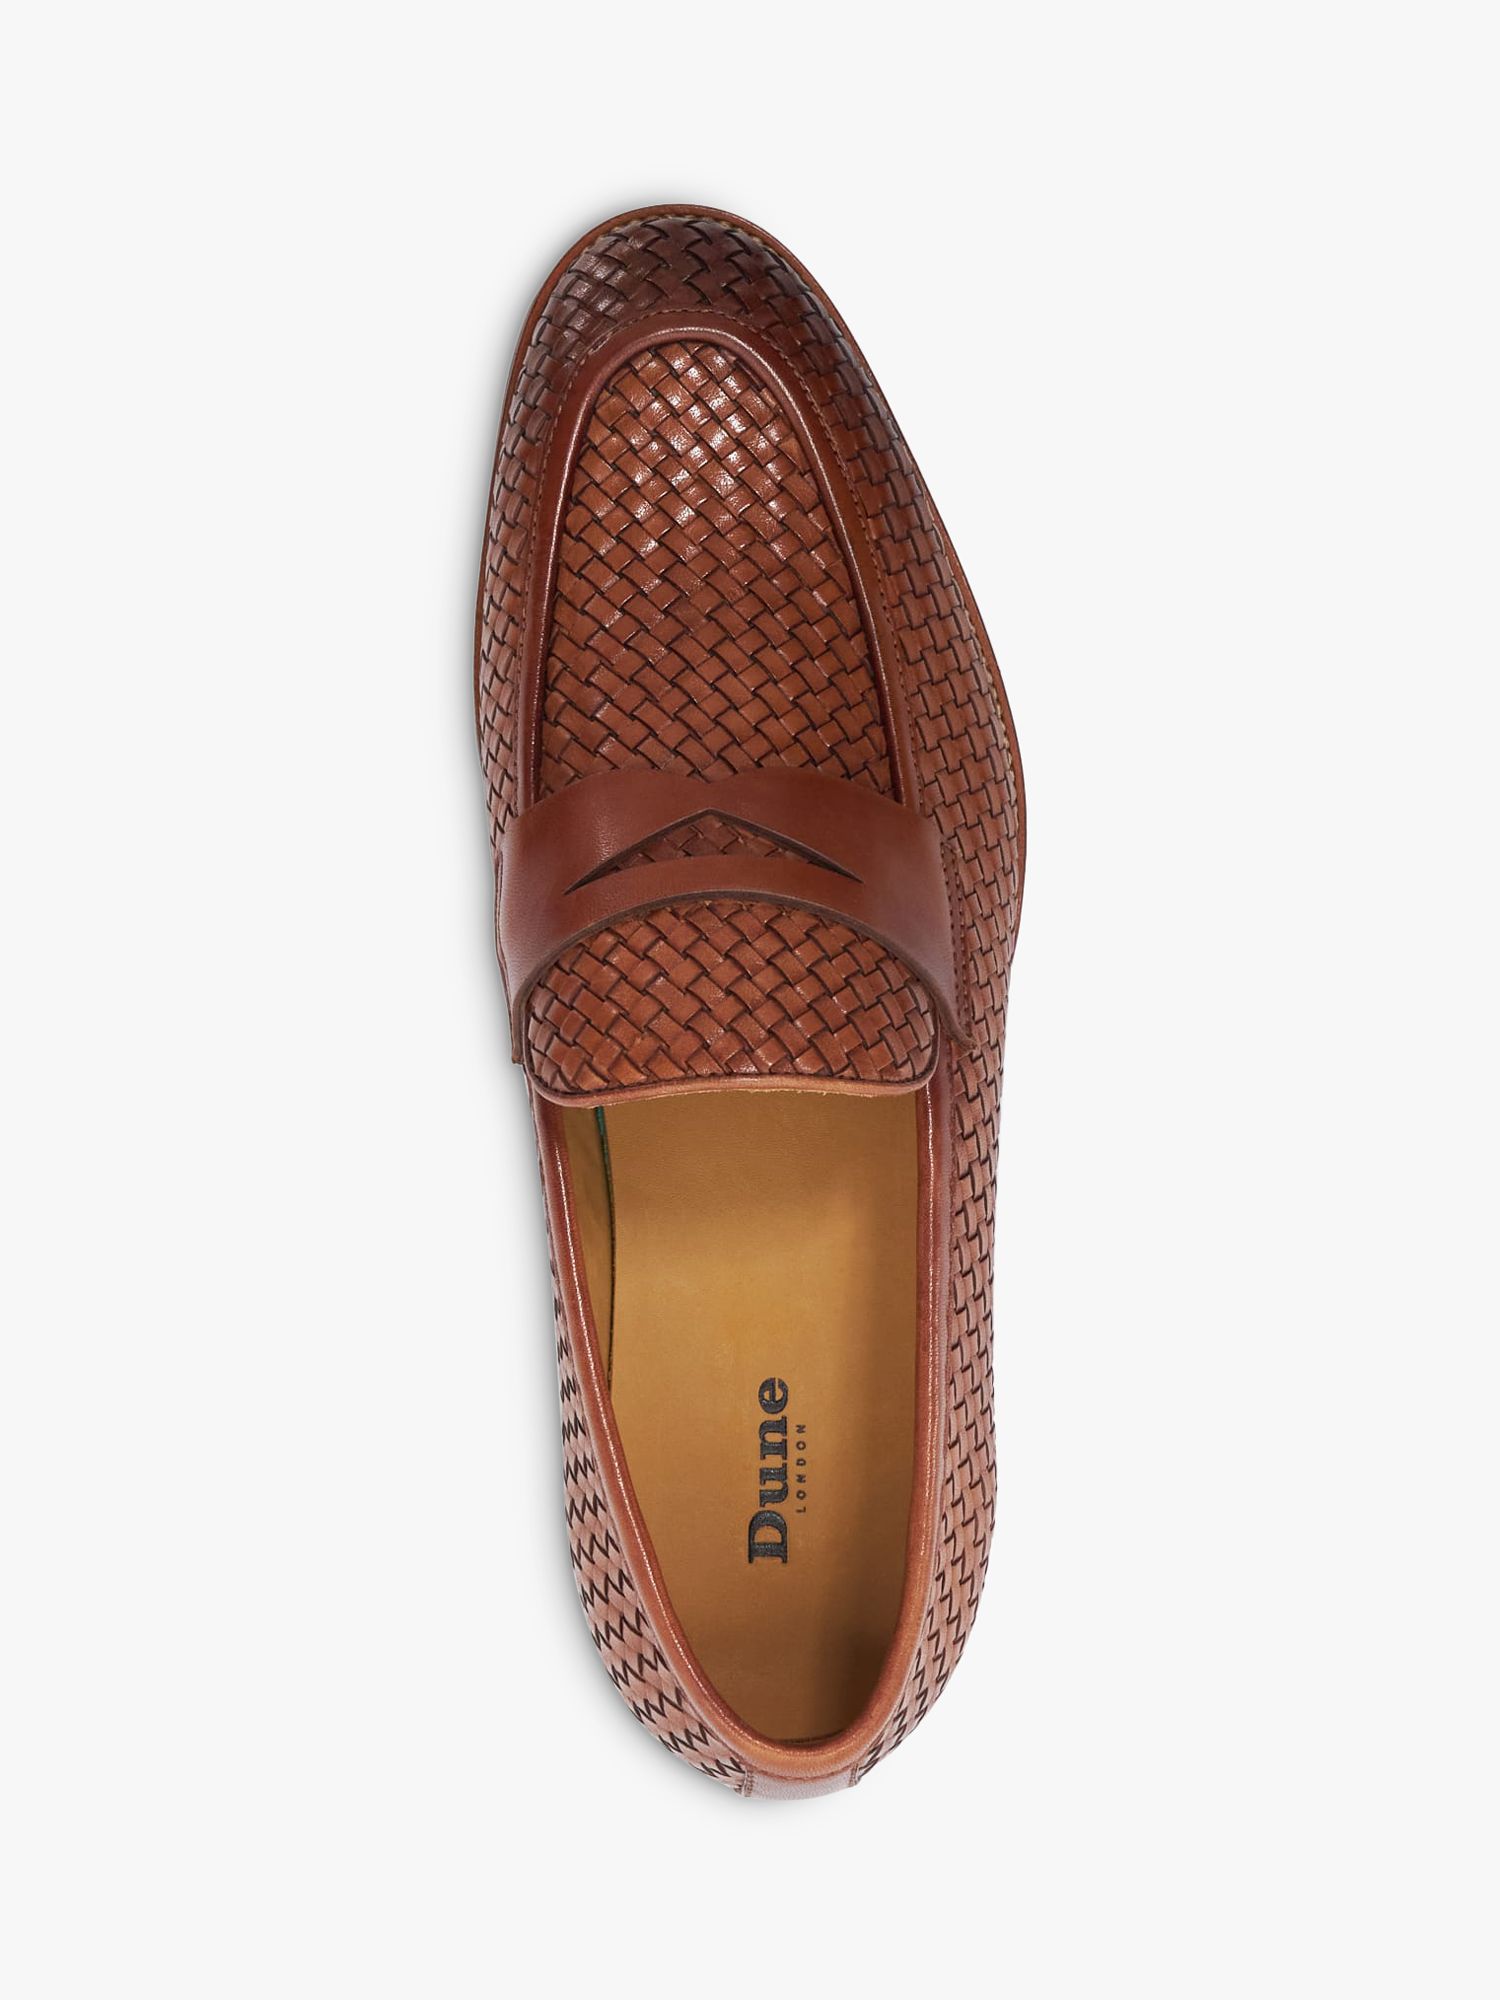 Dune Saharas Leather Penny Loafers, Tan, 6